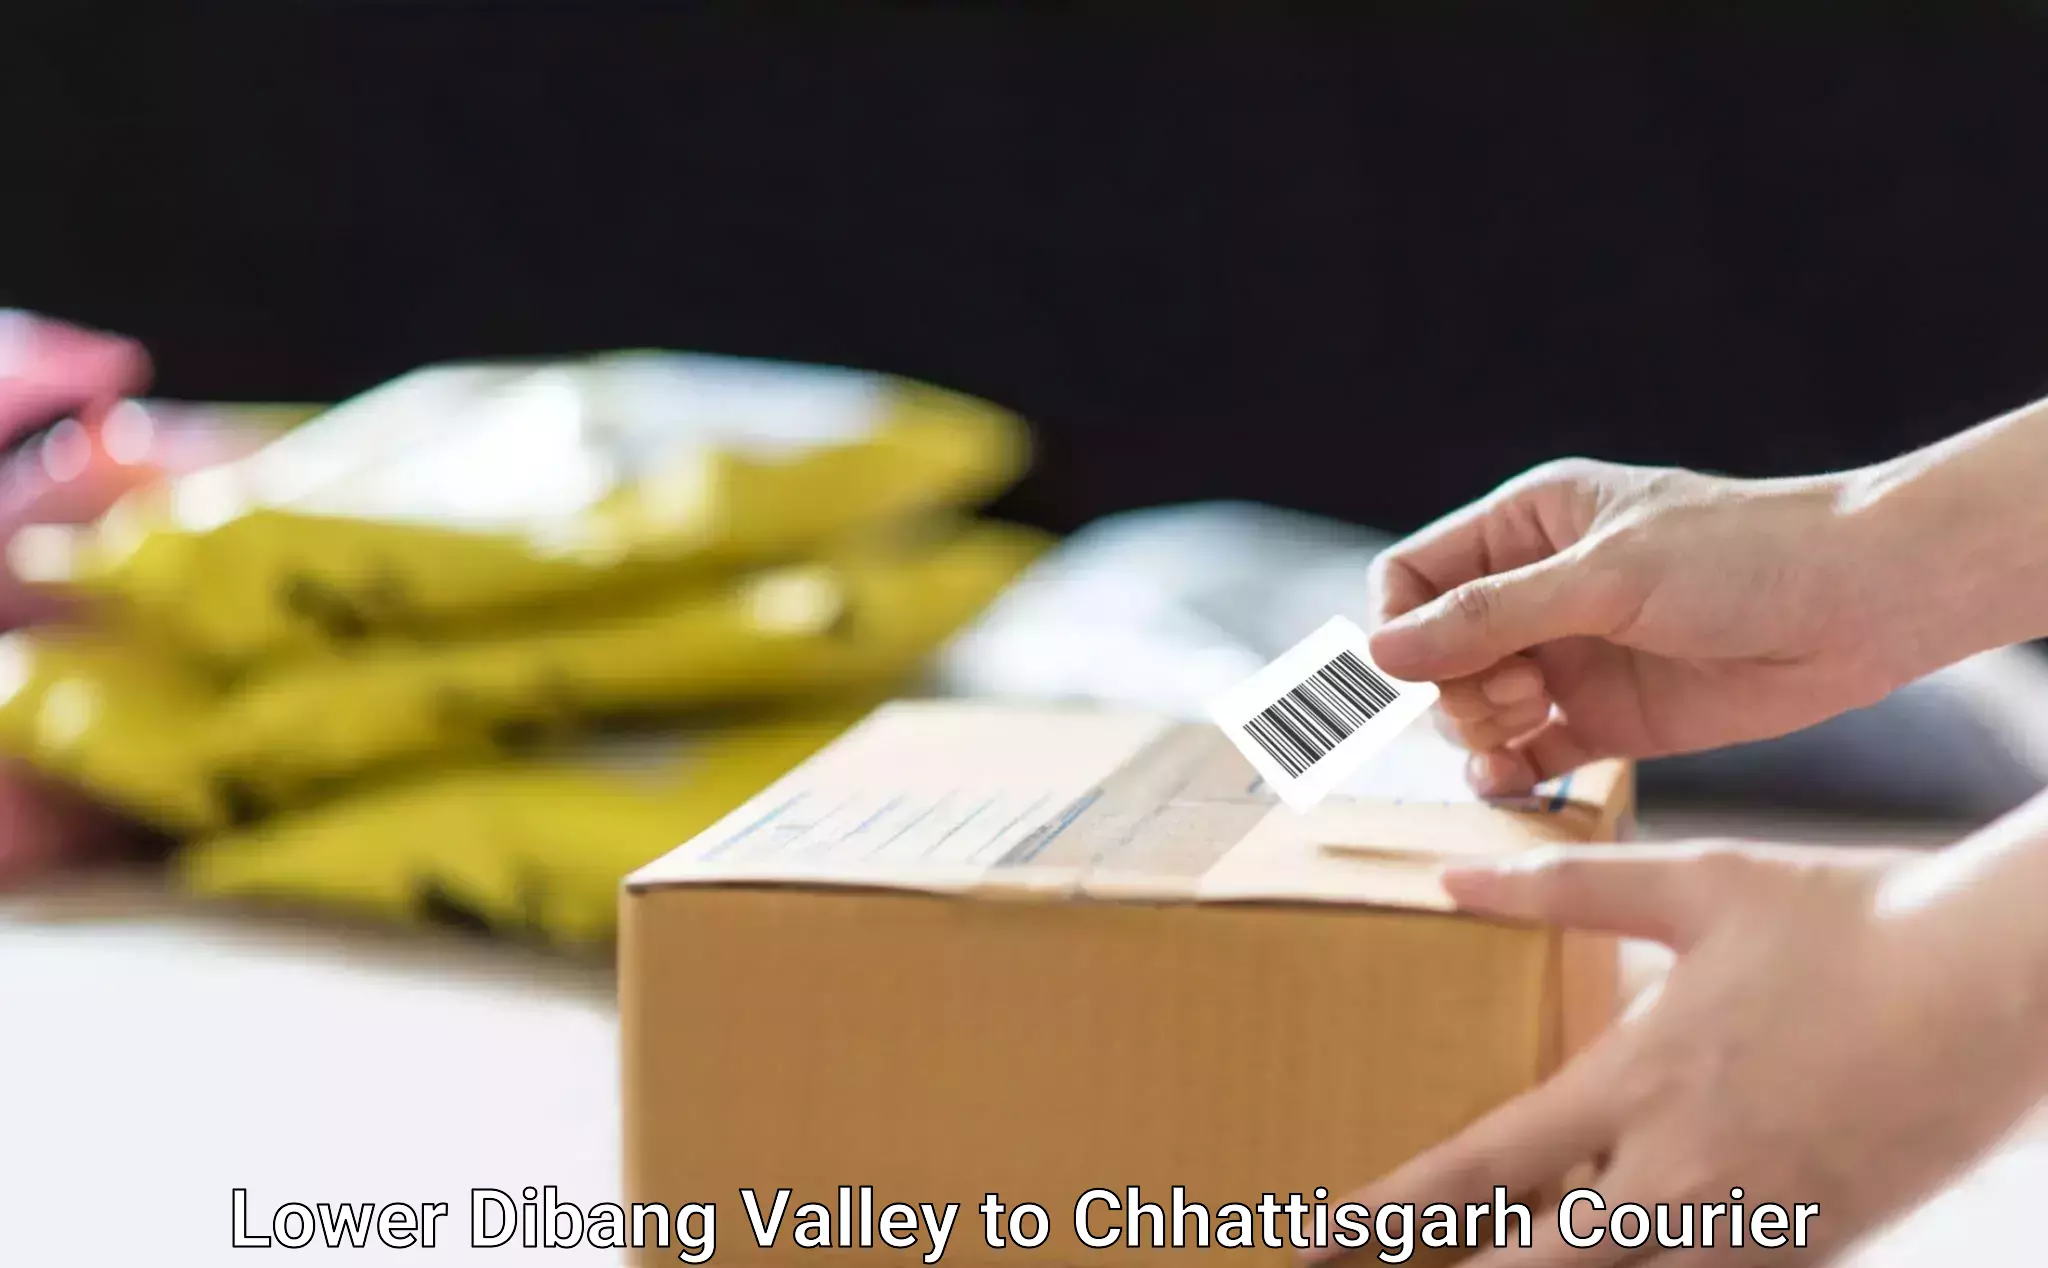 Subscription-based courier Lower Dibang Valley to Patna Chhattisgarh